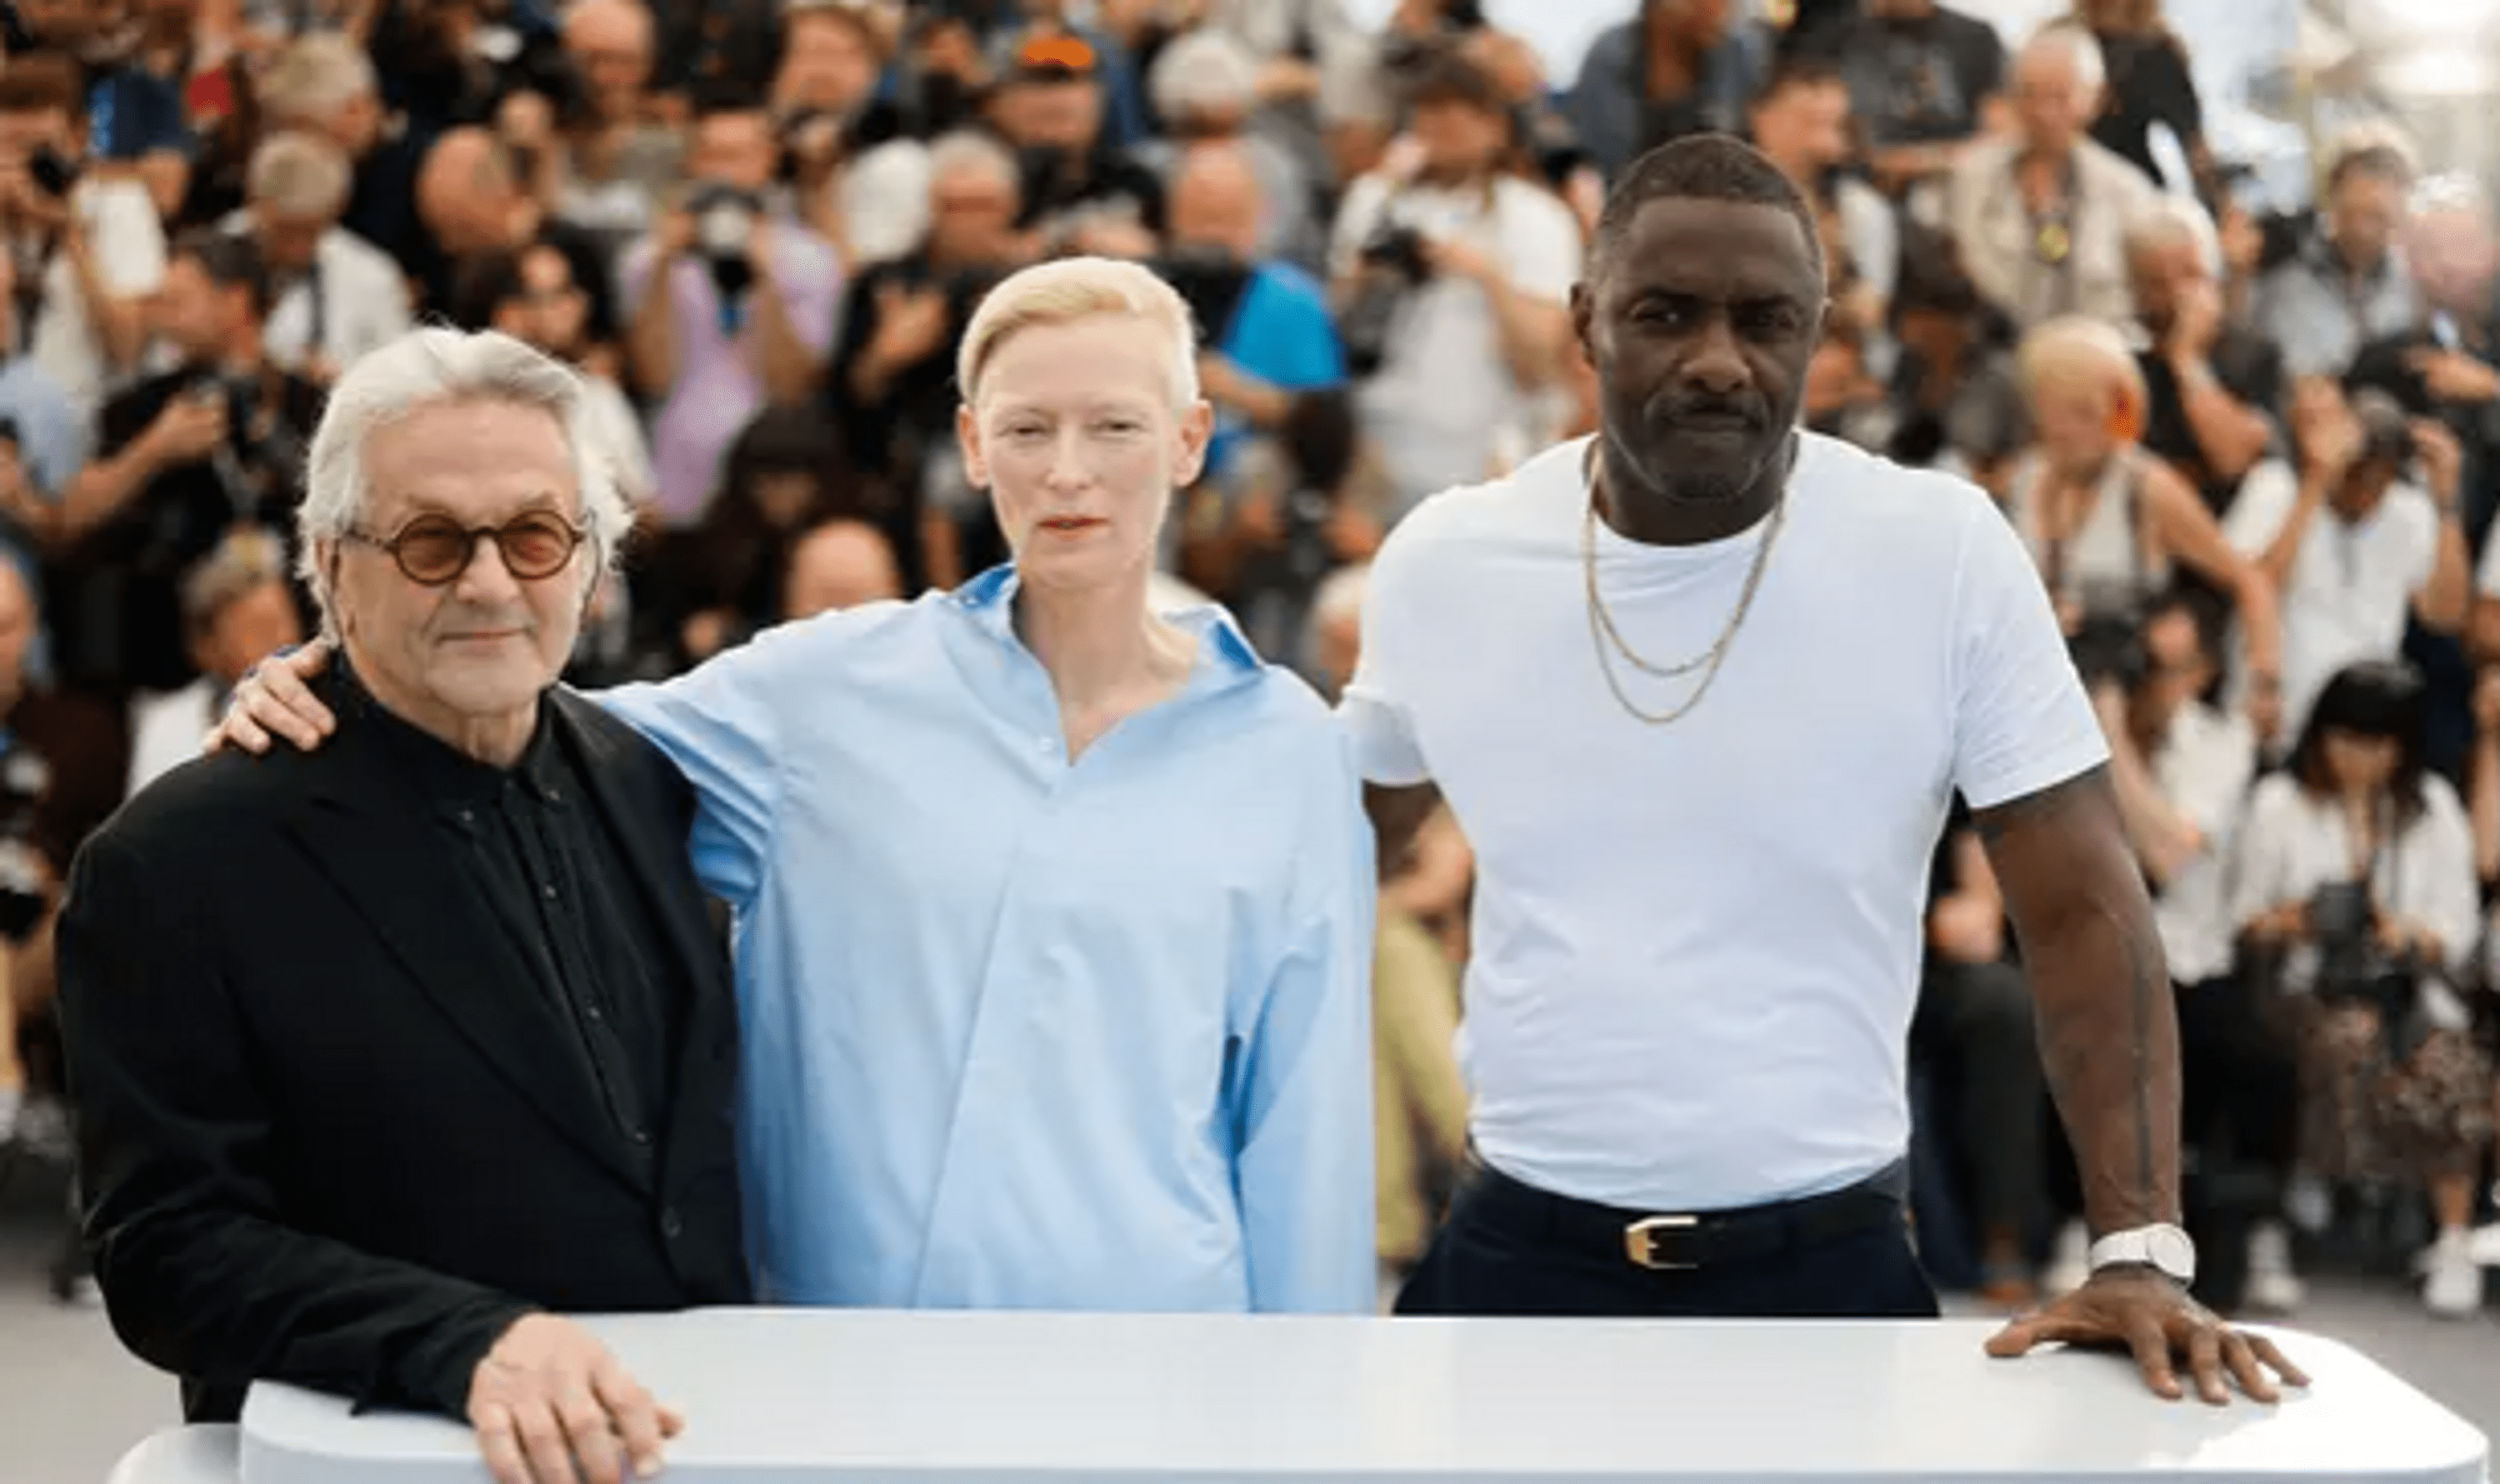 Tilda Swinton and Idris Elba at the premiere of their new film at the Cannes Film Festival